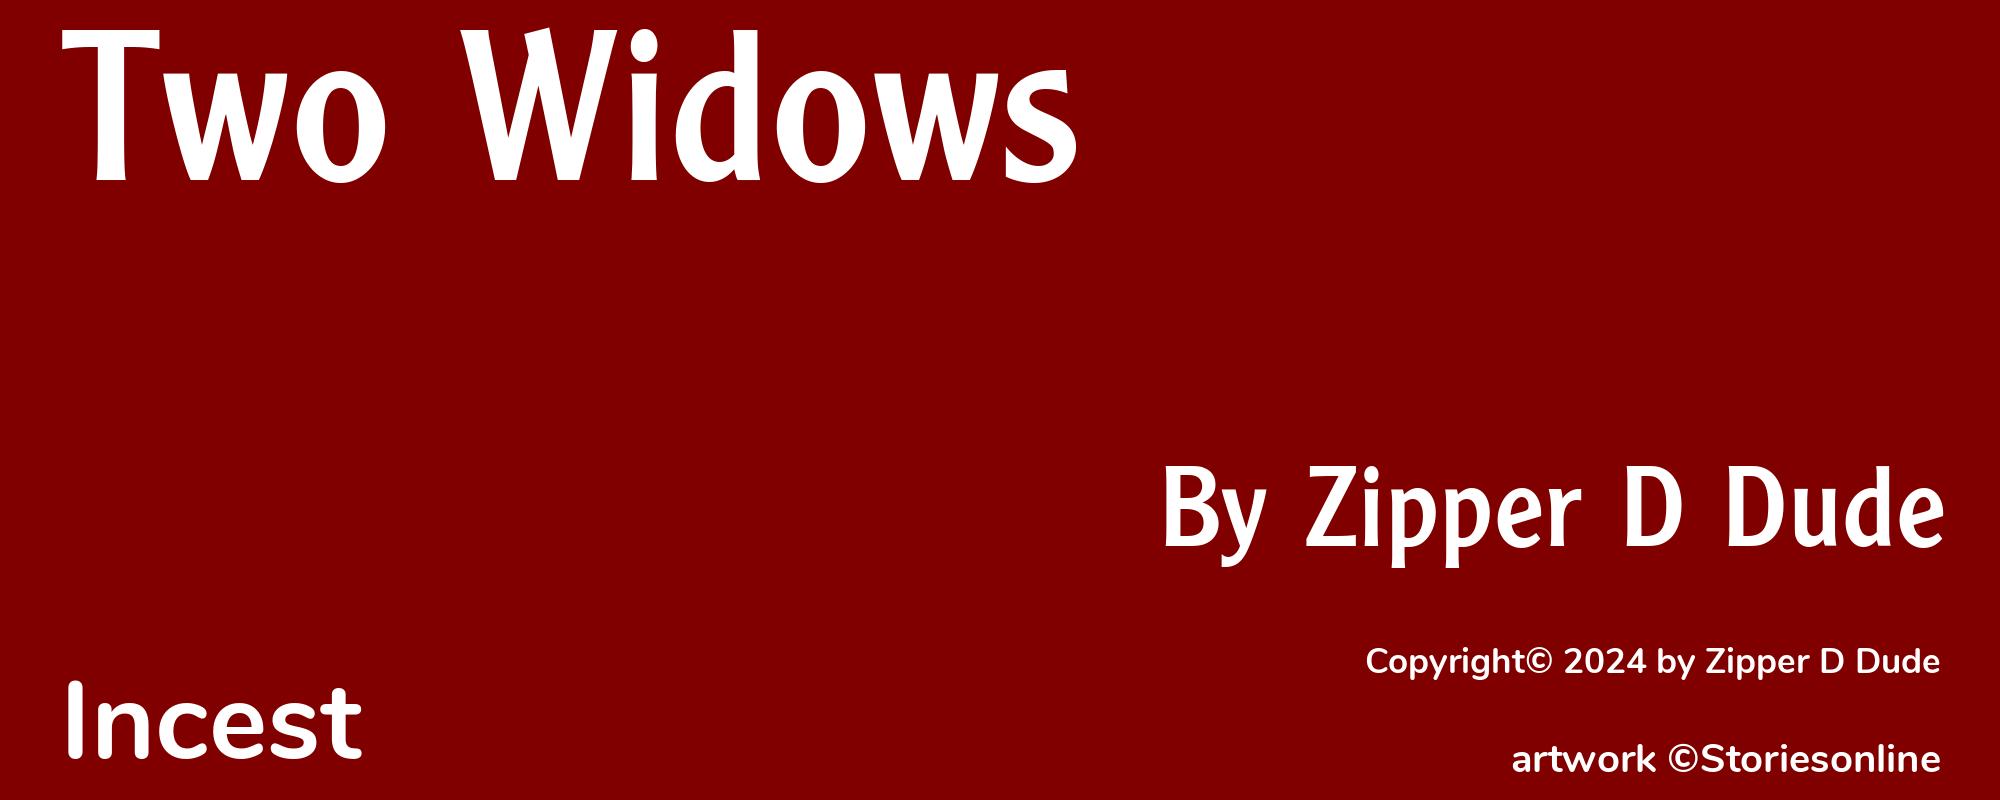 Two Widows - Cover